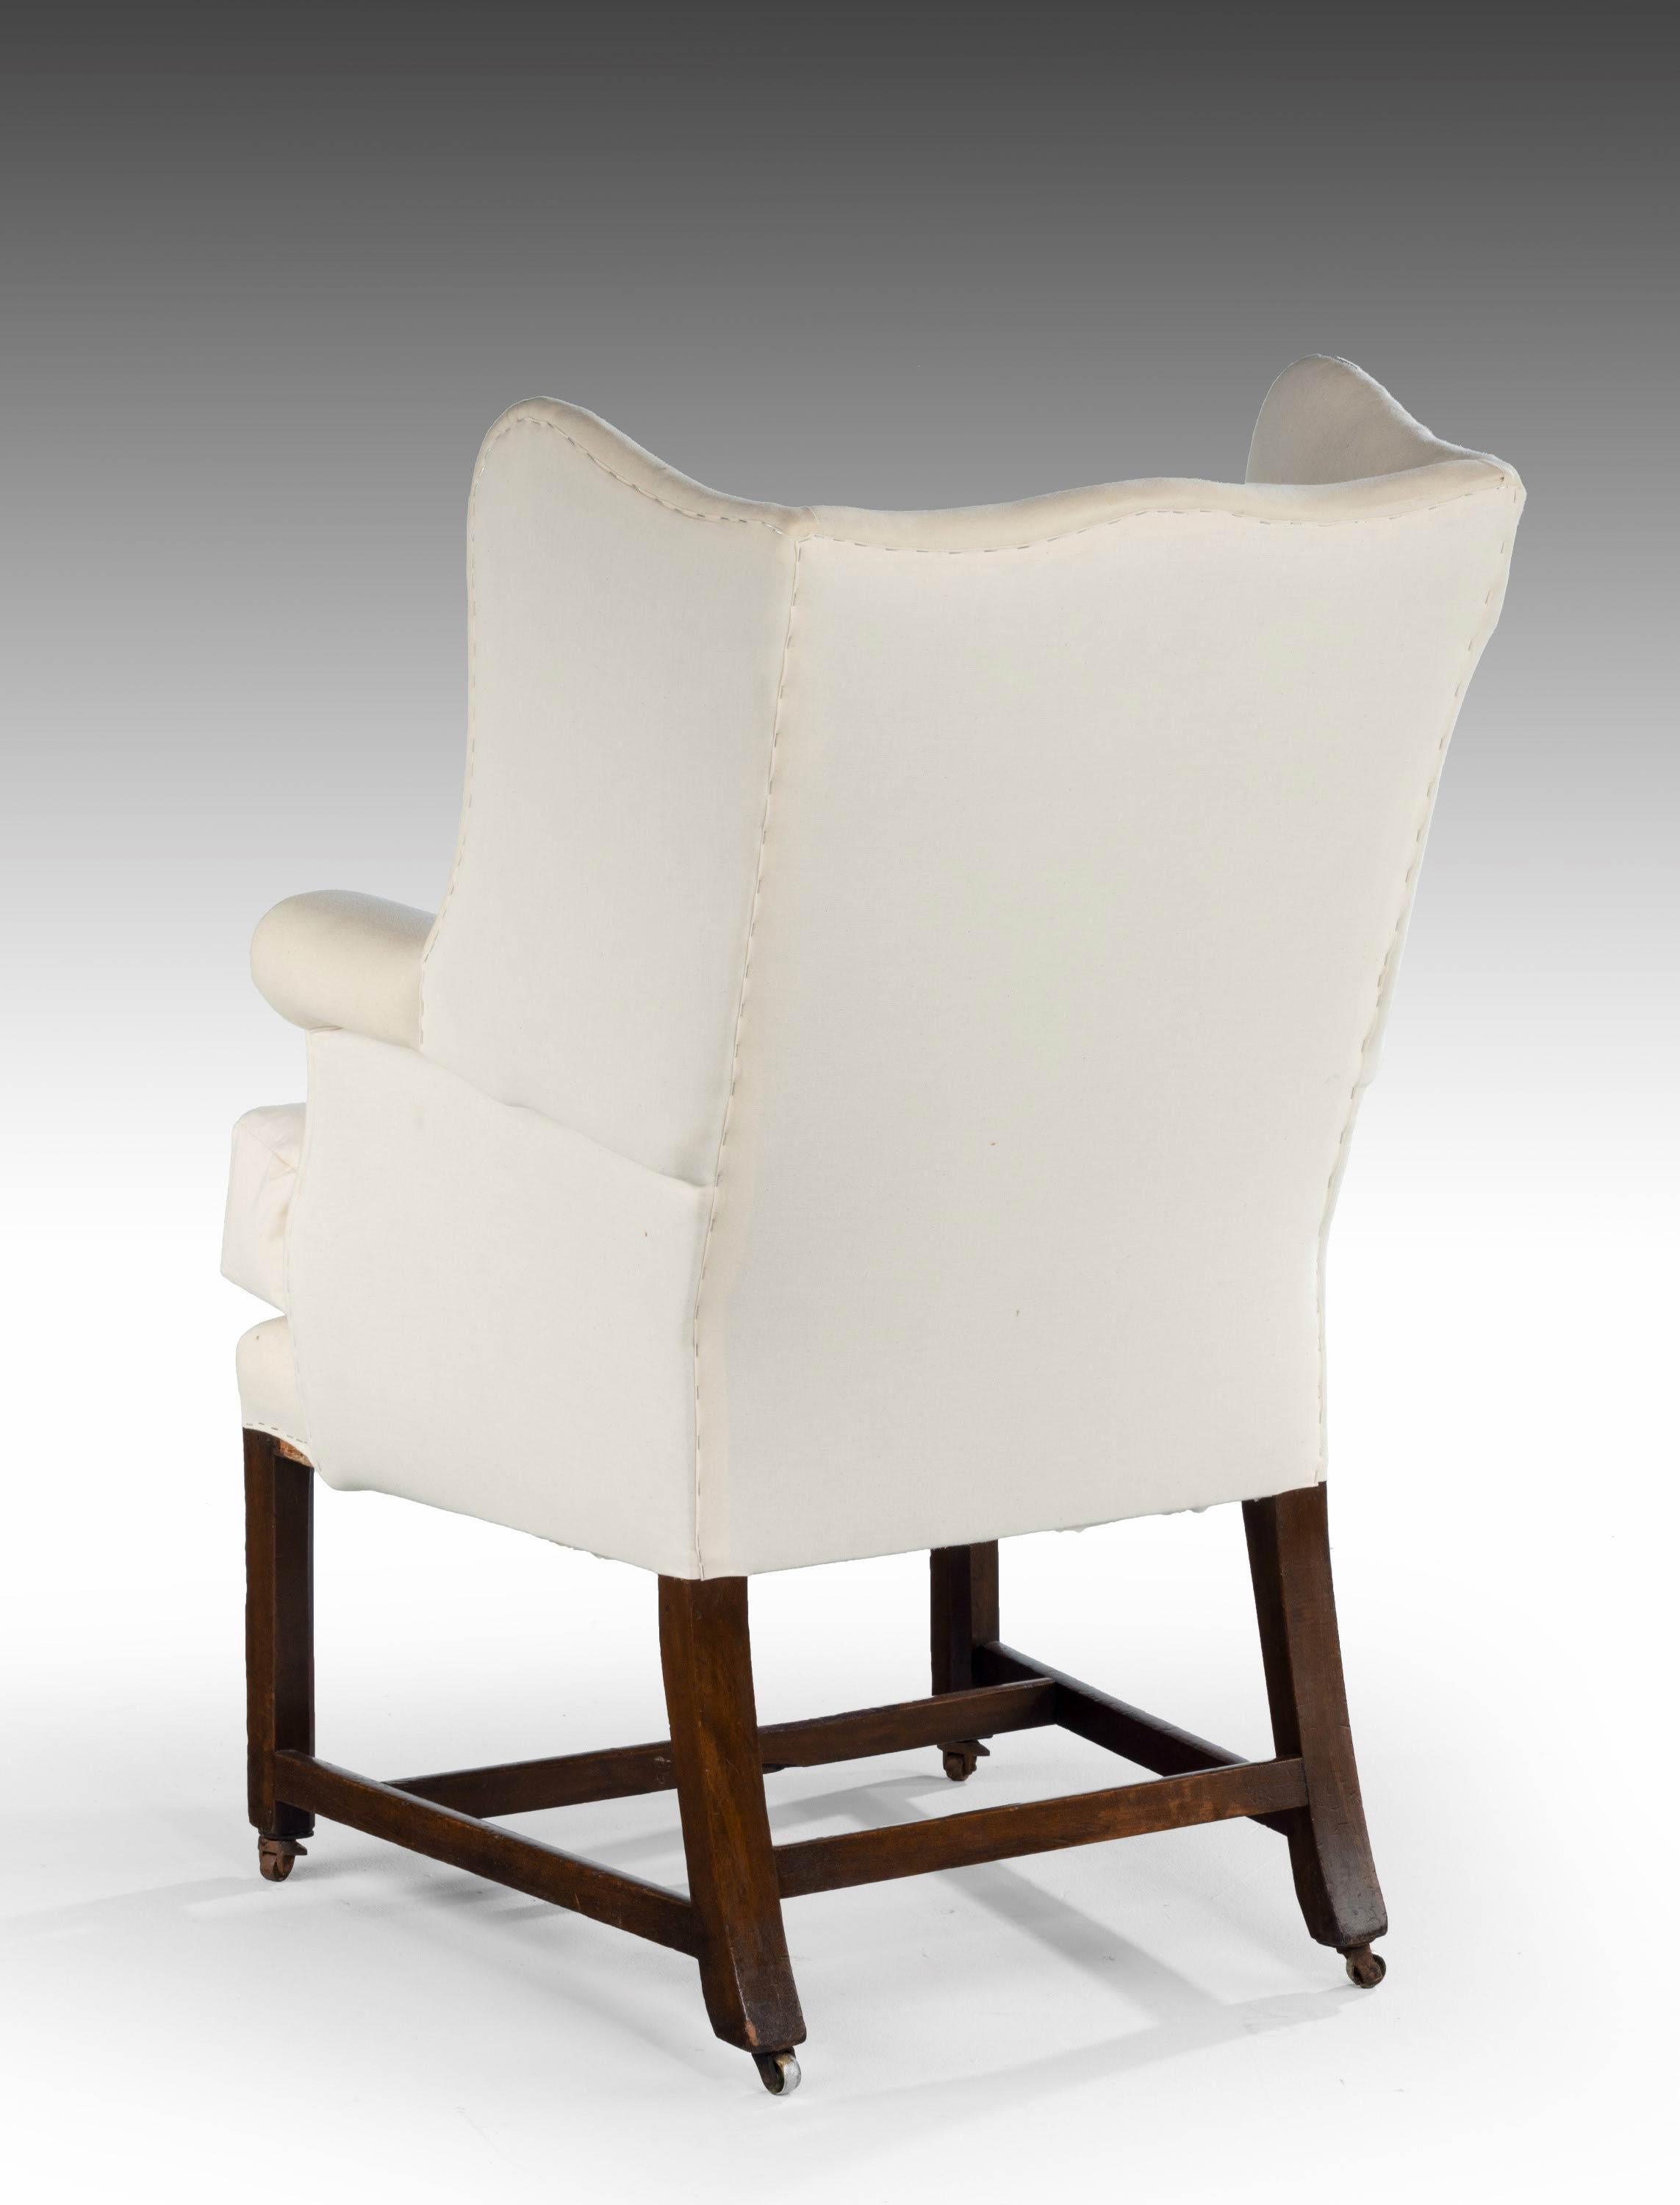 A mahogany wing chair of Chippendale design of quite small proportions, the shaped wings over rolled arms on square chamfered supports with an H stretcher. Now reupholstered in white cambric.

Seat height = 21.5 inches.